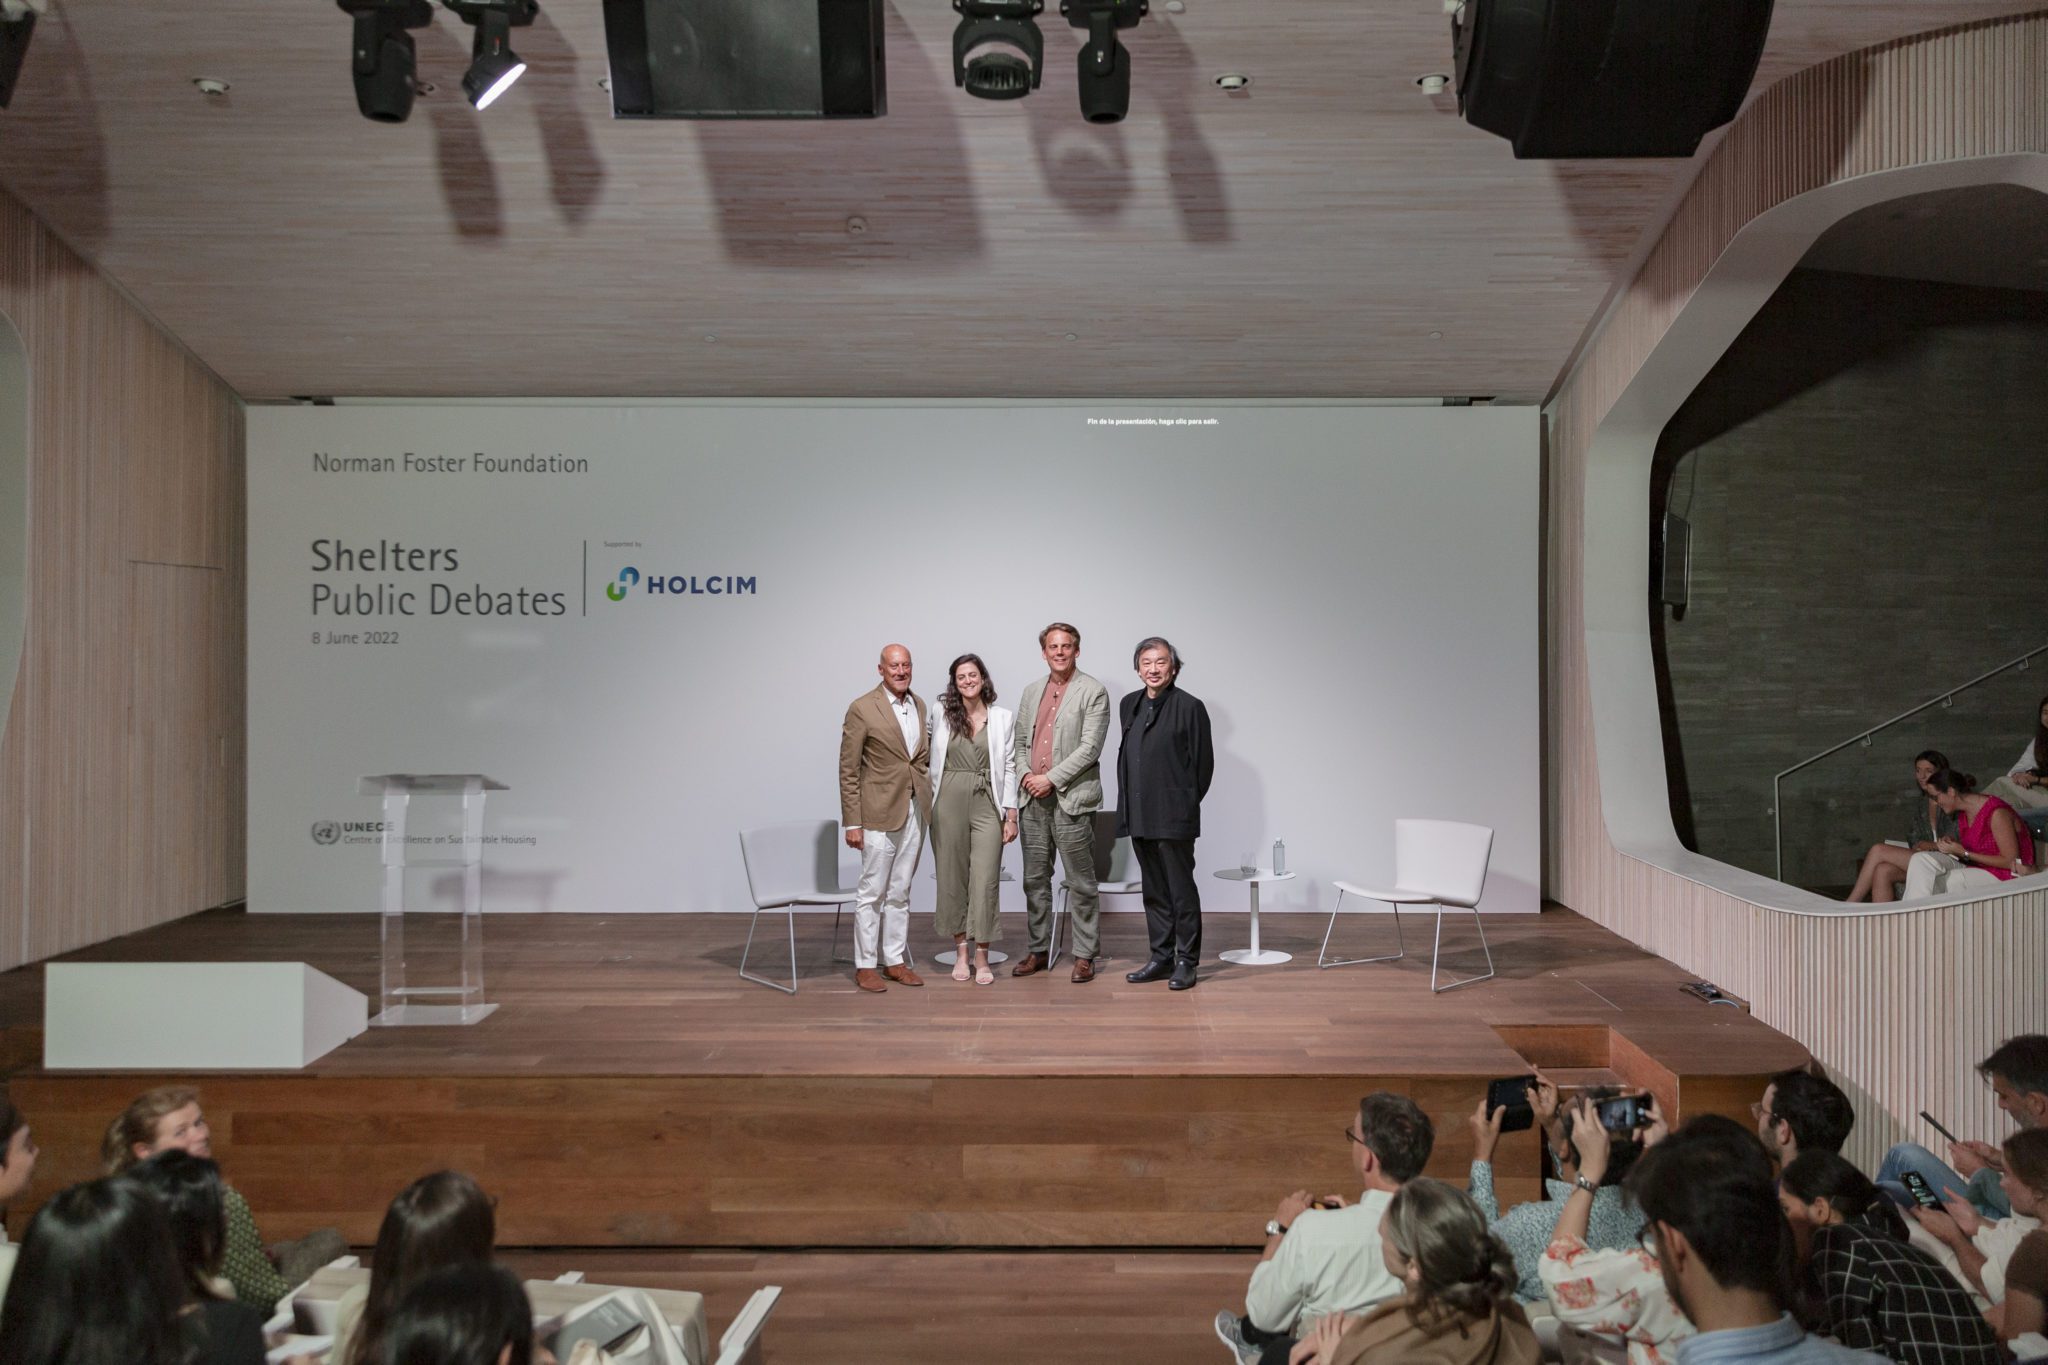 Norman Foster Foundation’s Shelters Public Debate